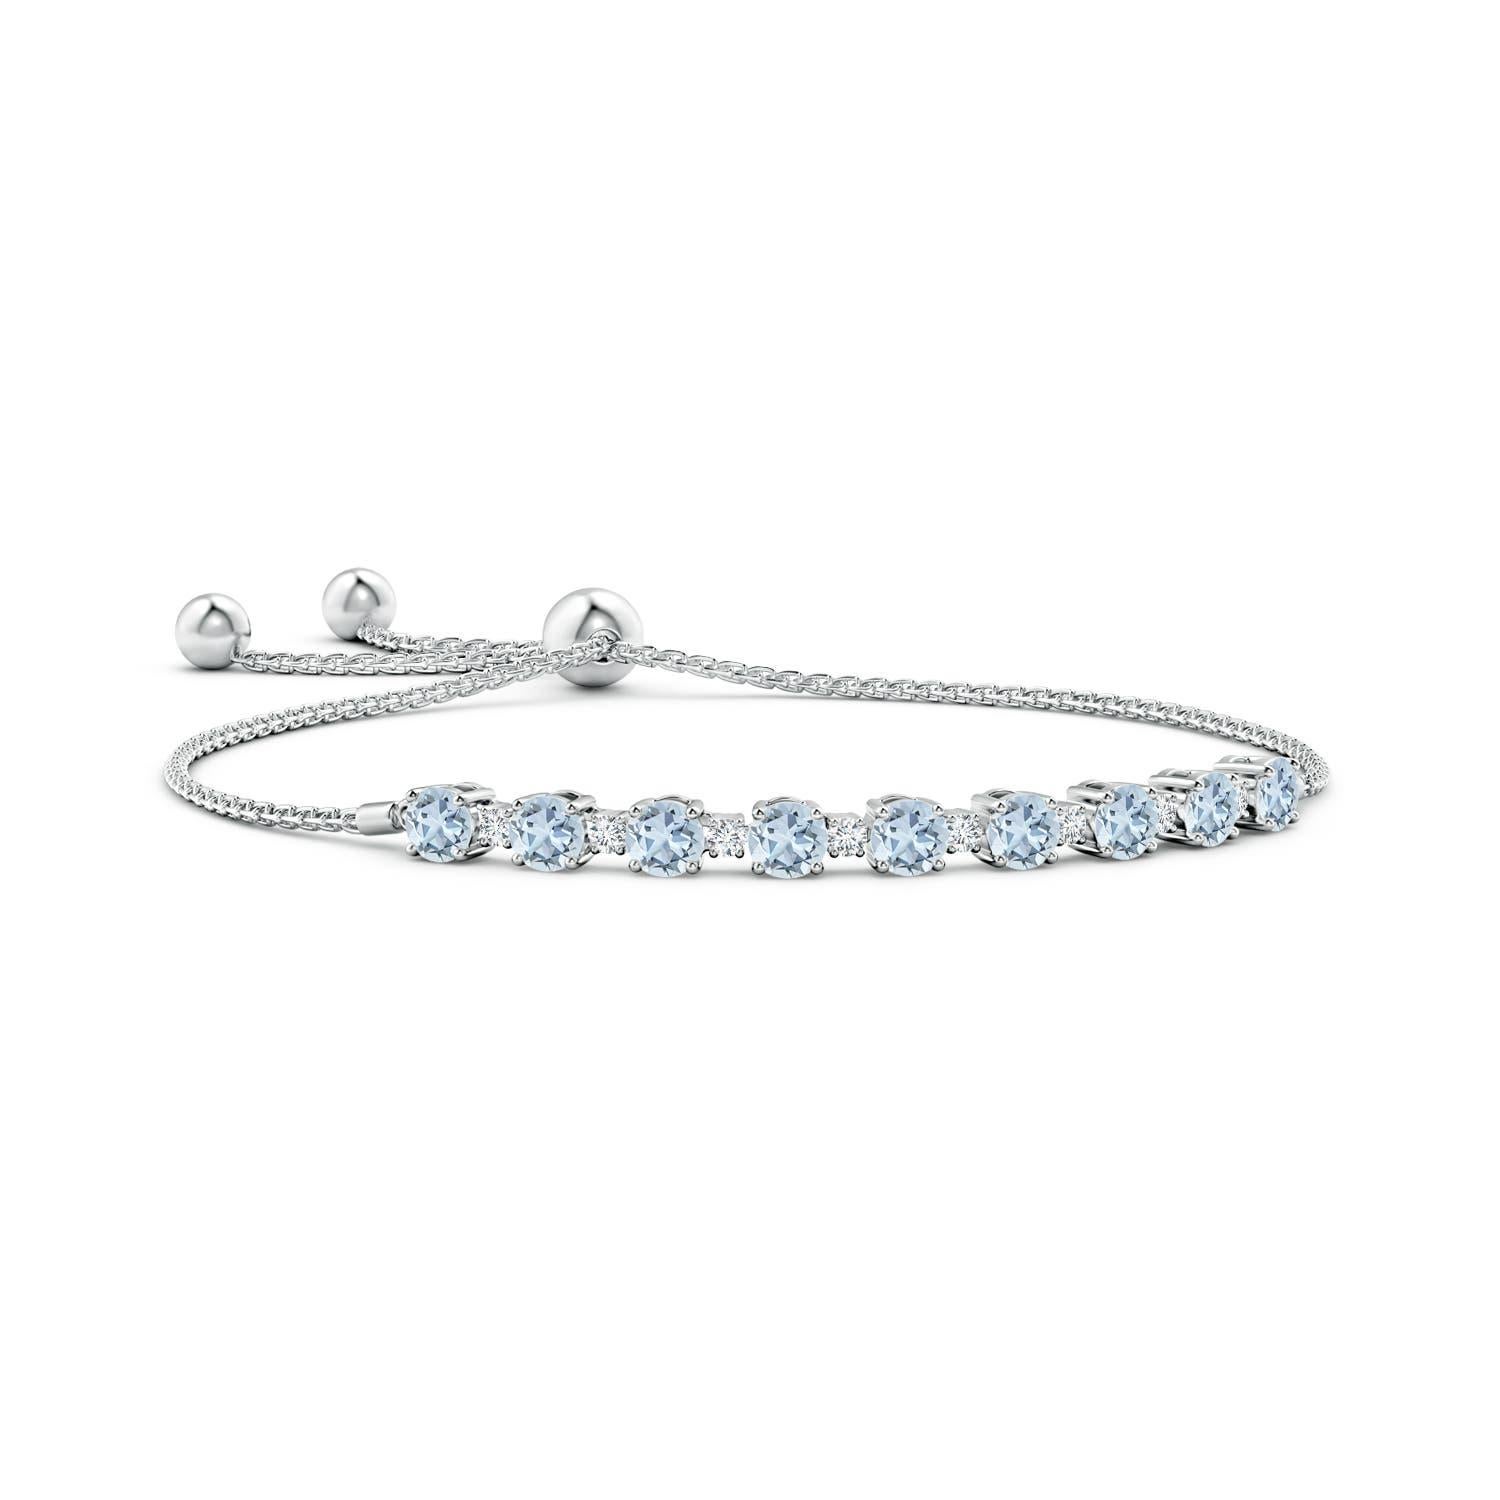 Sea blue aquamarines and glittering diamonds come together on this 14k white gold tennis bolo bracelet. They are prong set alternately and create a classic look. This bracelet is adjustable to fit most wrists.